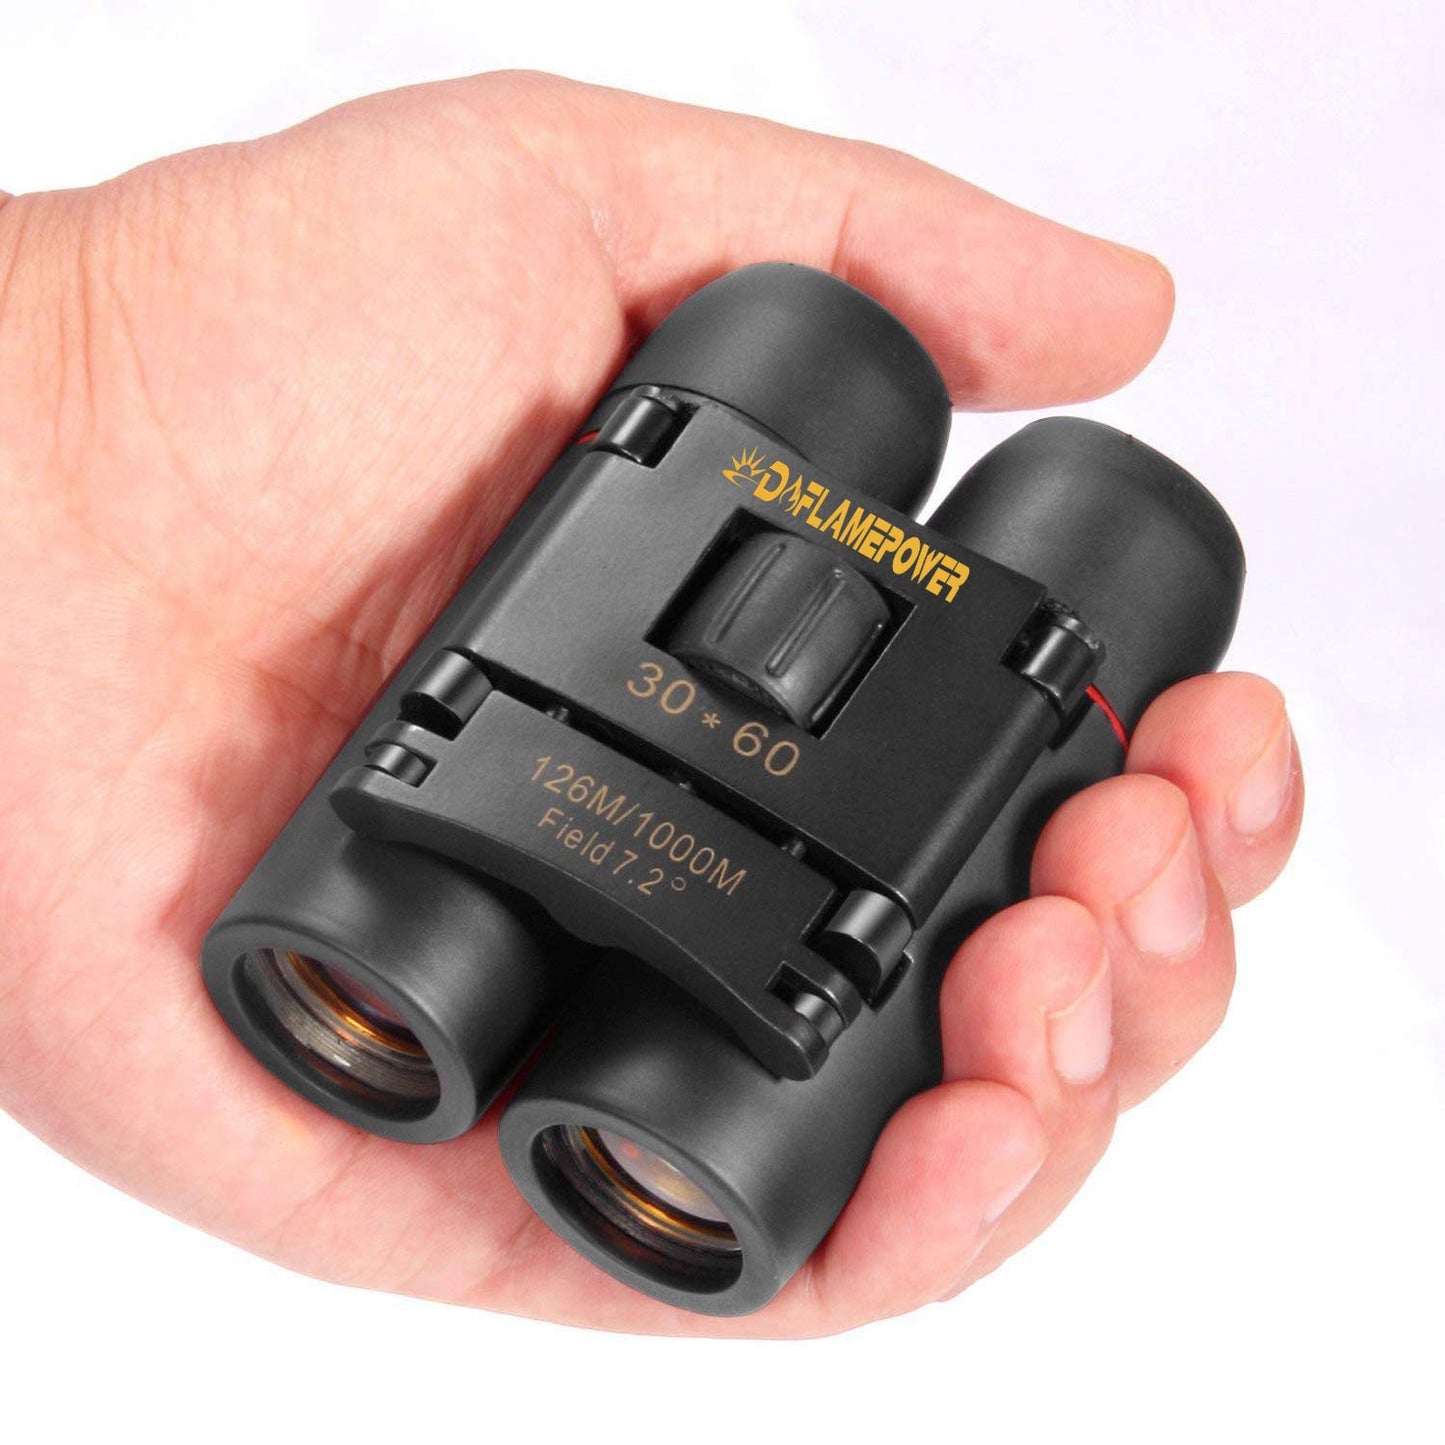 DFlamepower Mini Binoculars 30x60 Compact Folding Telescope with Waterproof for Adults/Kids/Birdwatching/Travelling/Sightseeing/Hunting/Outdoor birding